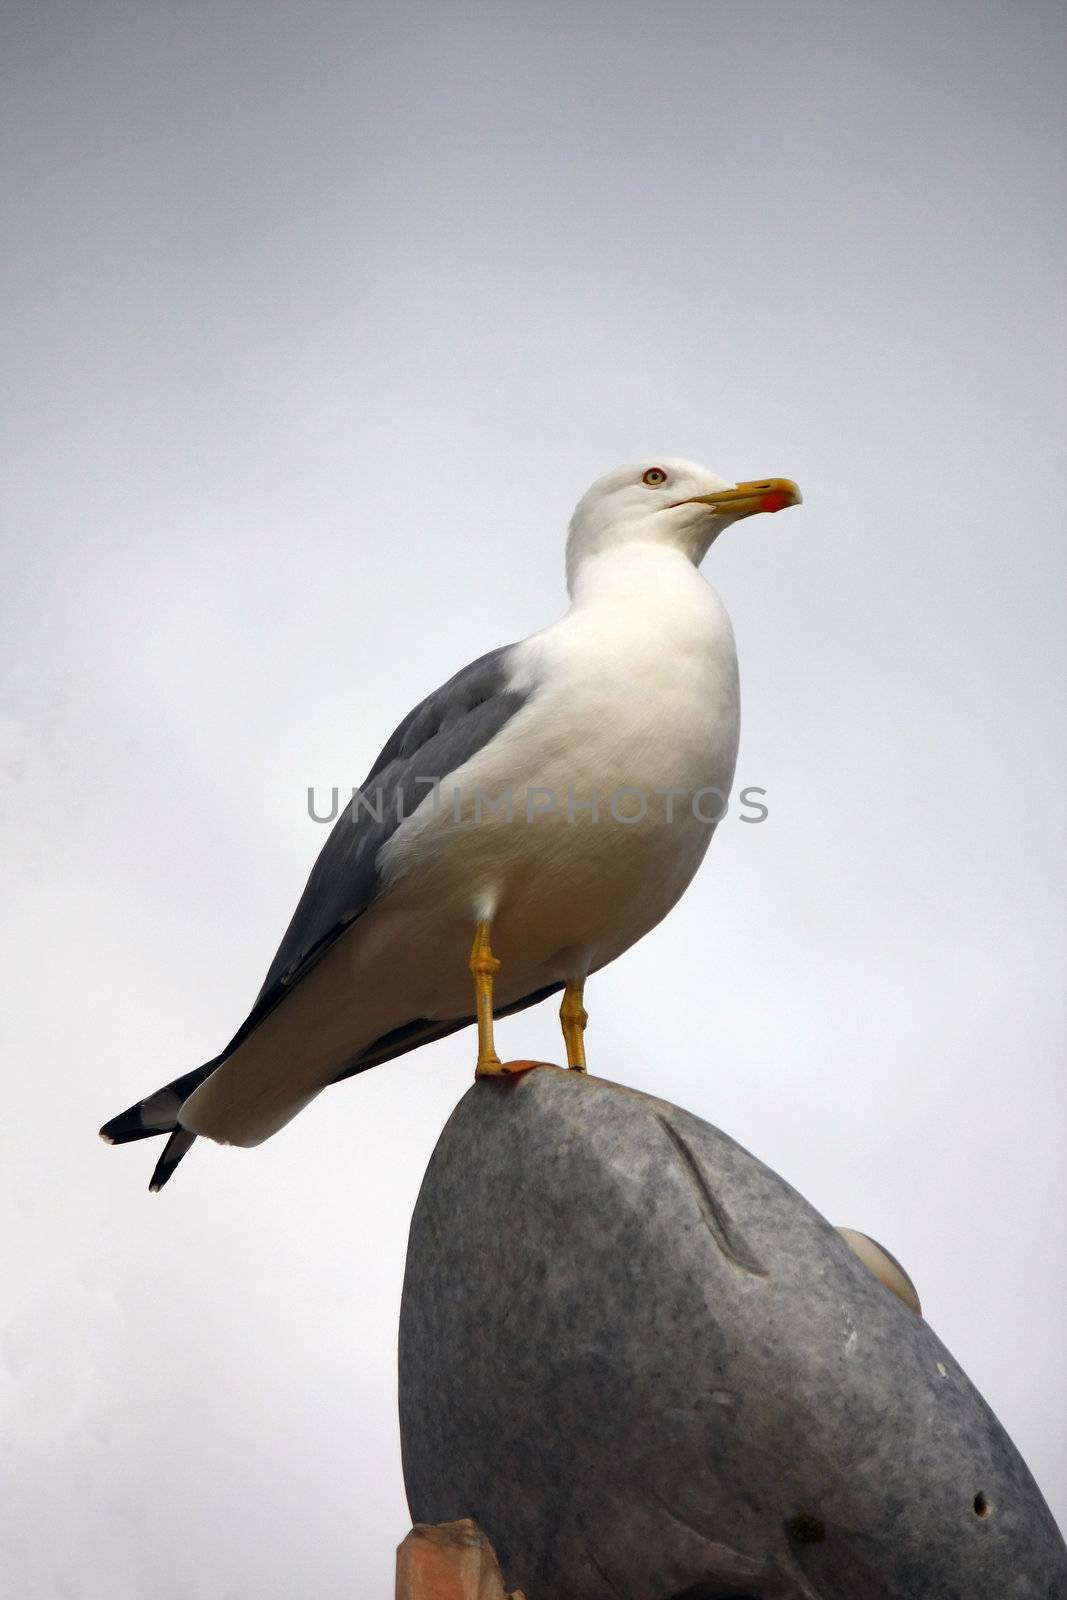 Low perspective view of a yellow-legged gull on top of a rock.